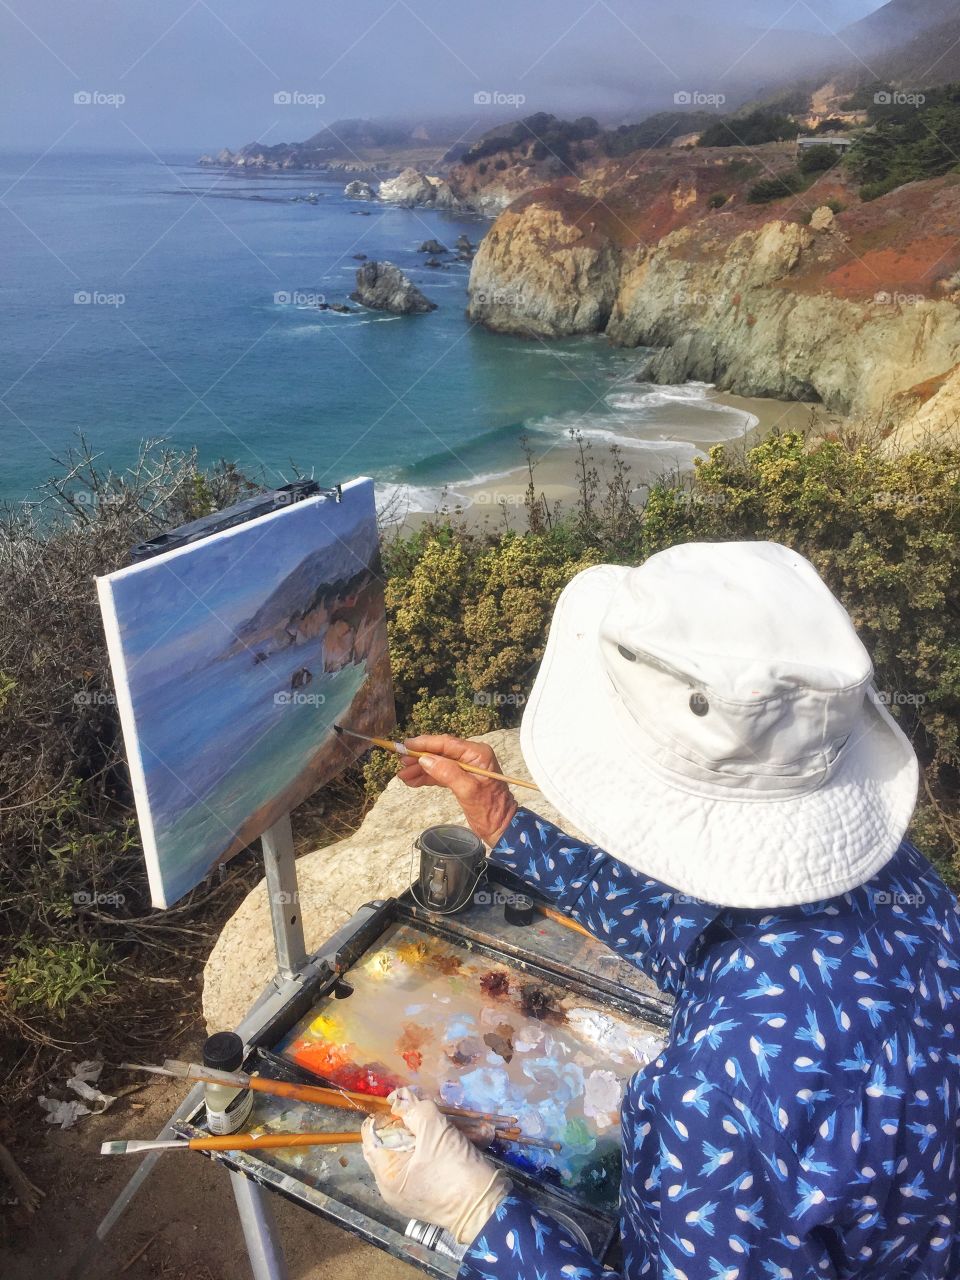 A painter tries to put on canvas the beauty of California coast. Then she can just take the painting home and remember the magic feeling you get when you sit on that coast and feel the ocean breeze on your face! 